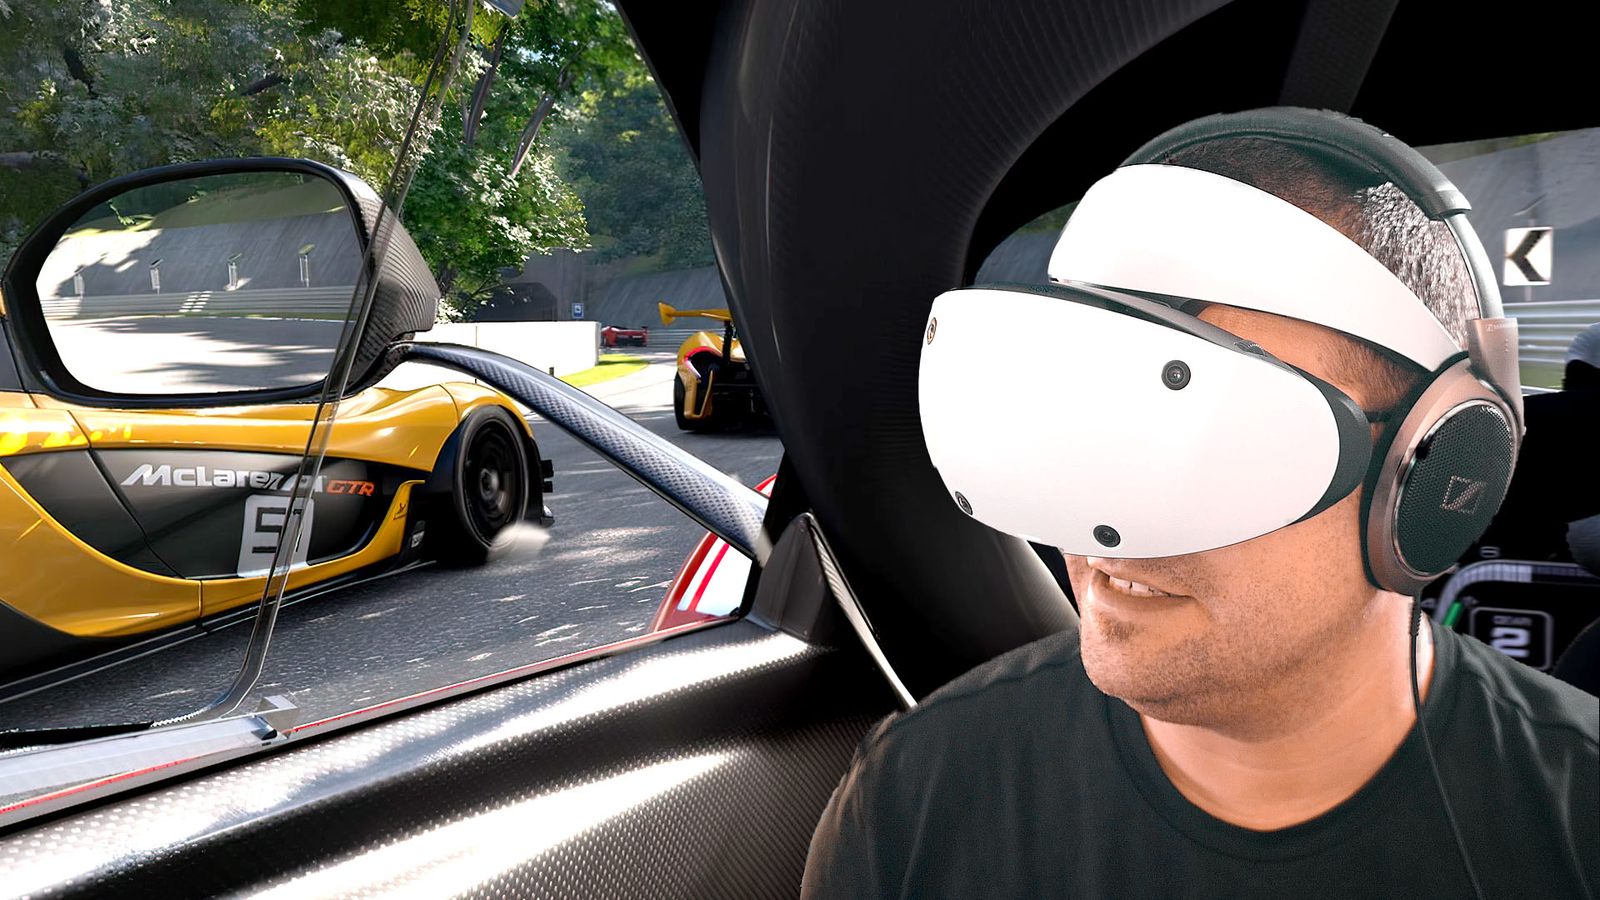 Gran Turismo 7 PS VR2 Gameplay - Is This The Ultimate Racing Game